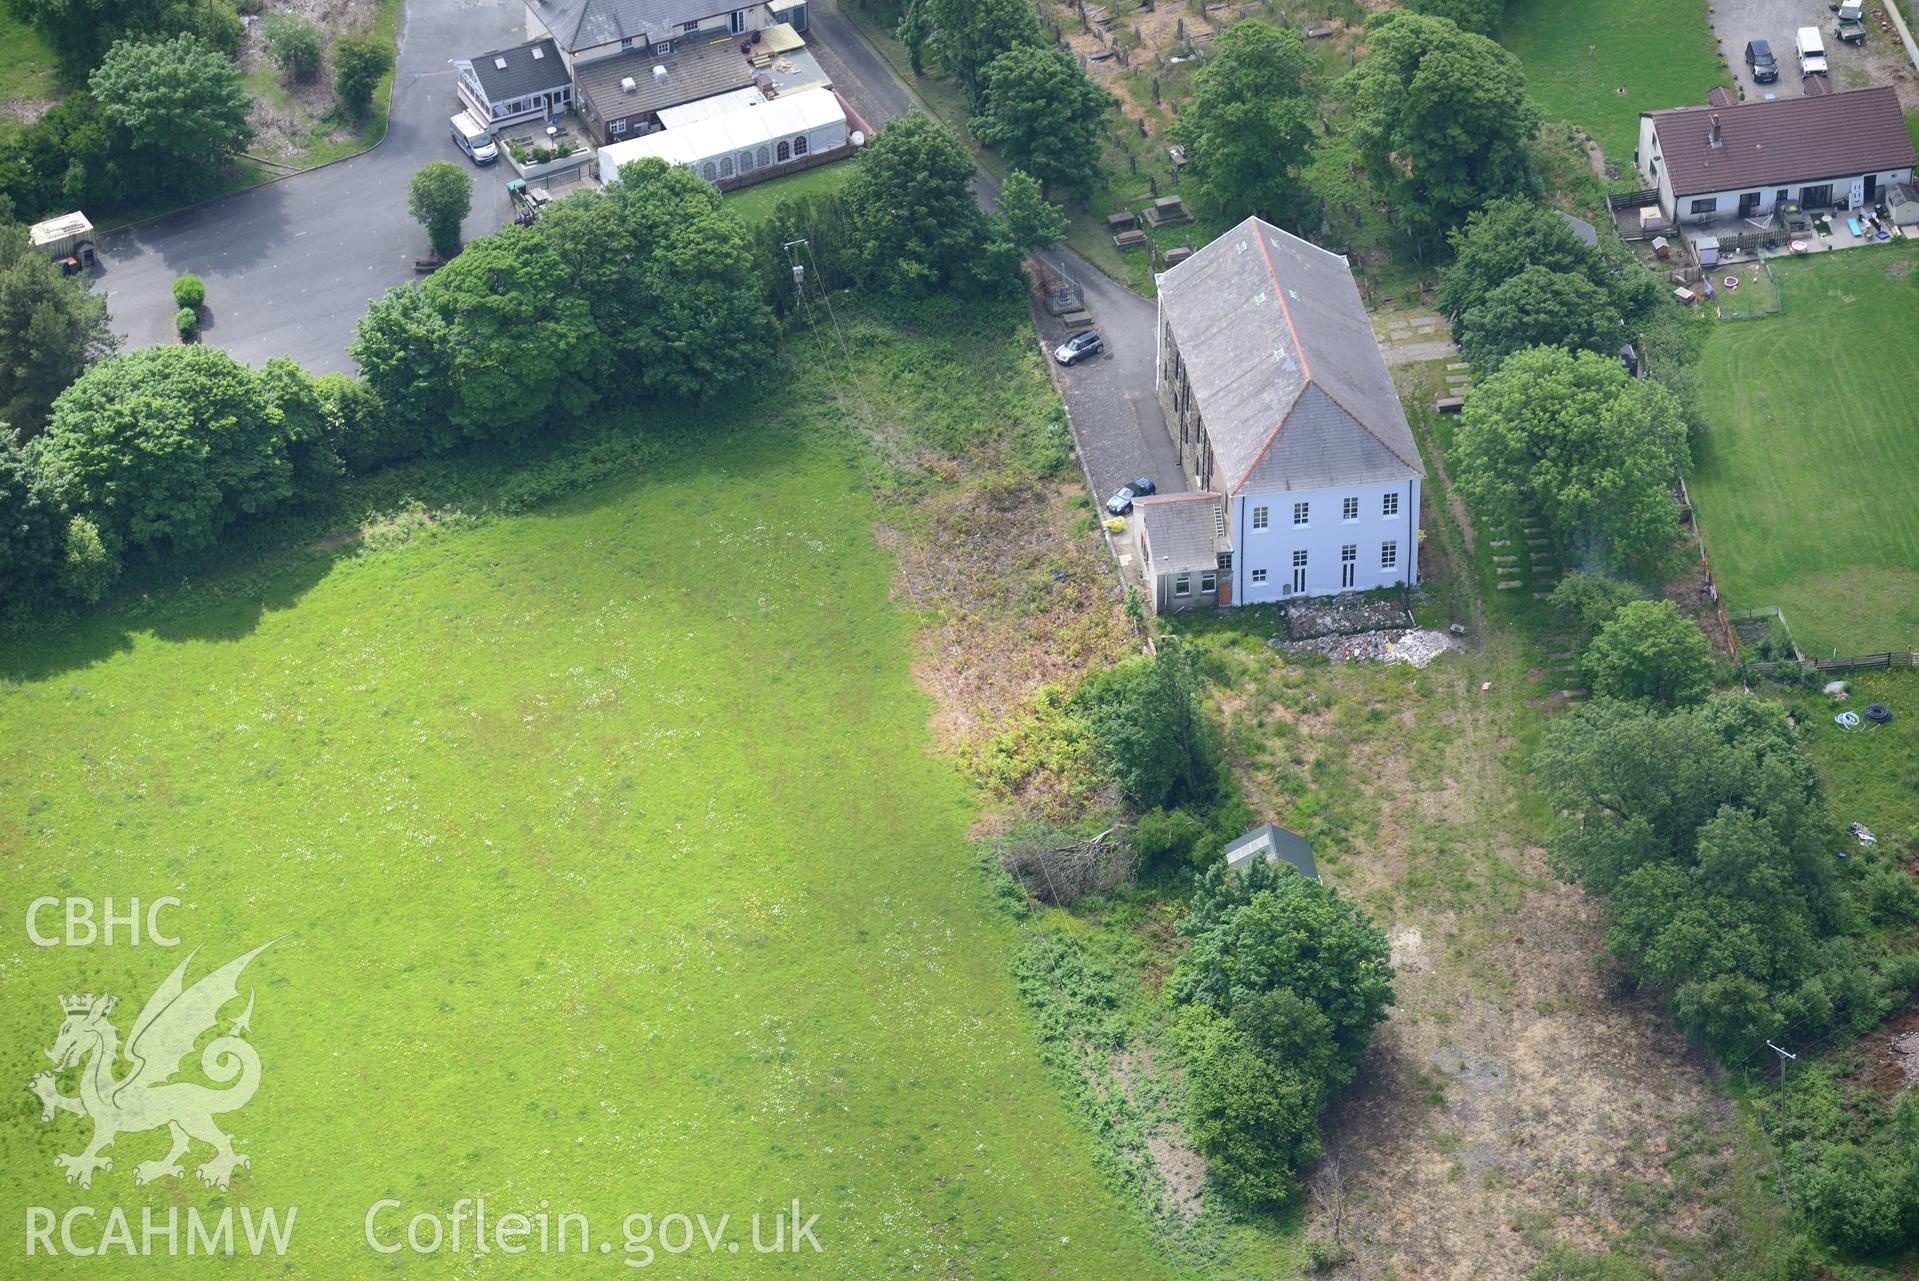 Mynydd-Bach Independent Chapel near Morriston, Swansea. Oblique aerial photograph taken during the Royal Commission's programme of archaeological aerial reconnaissance by Toby Driver on 19th June 2015.